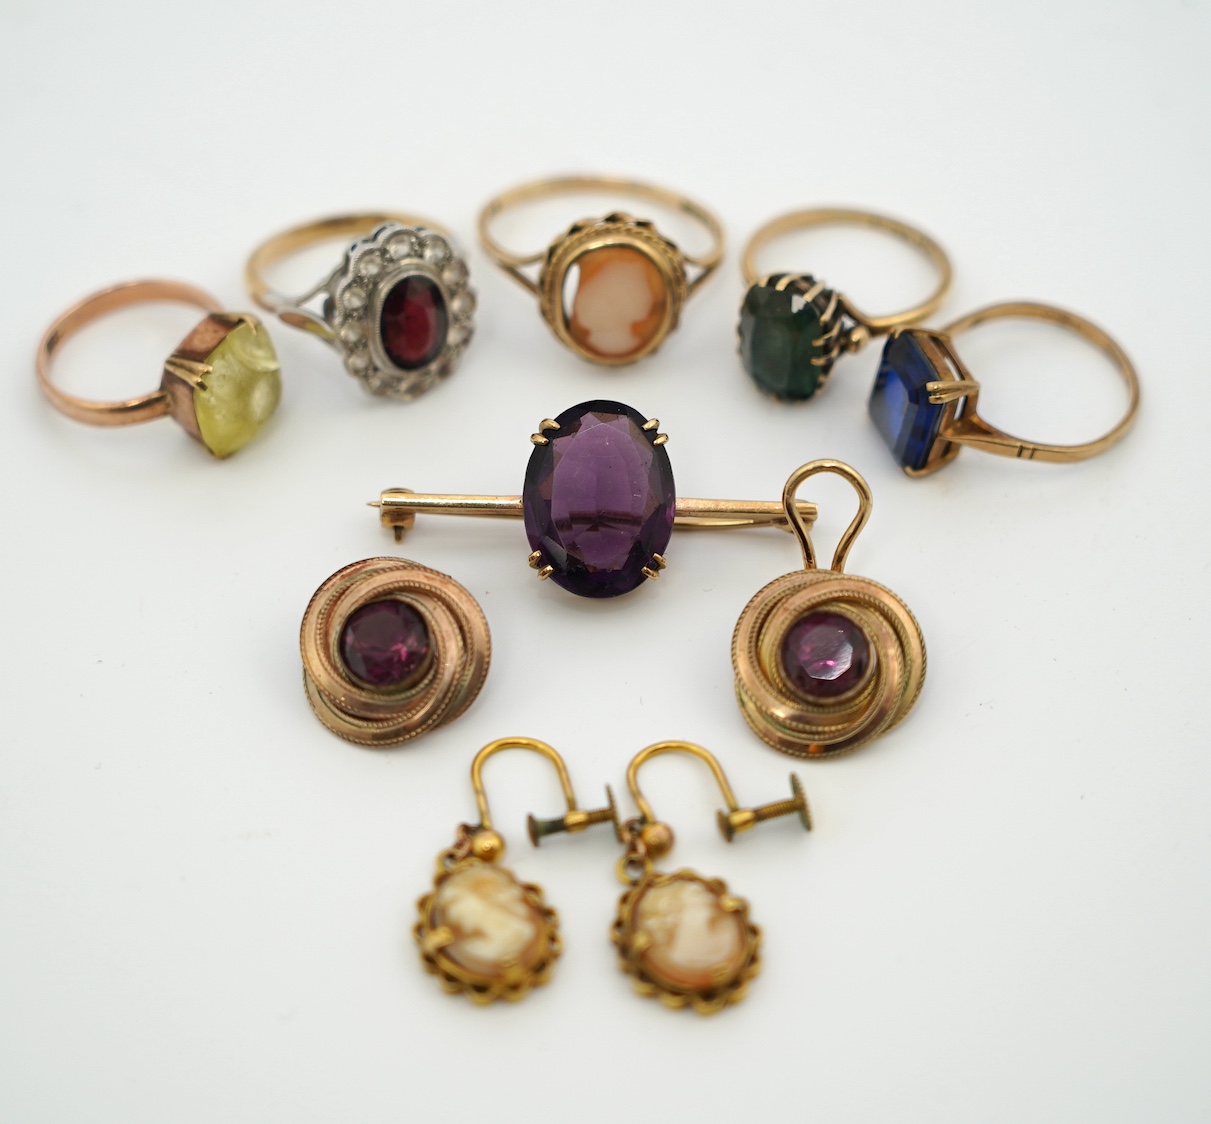 Five assorted 9ct and gem set rings, including cameo shell, two pairs of ear clips including 9ct cameo shall with rolled gold clip and a yellow metal and gem set bar brooch. Condition - poor